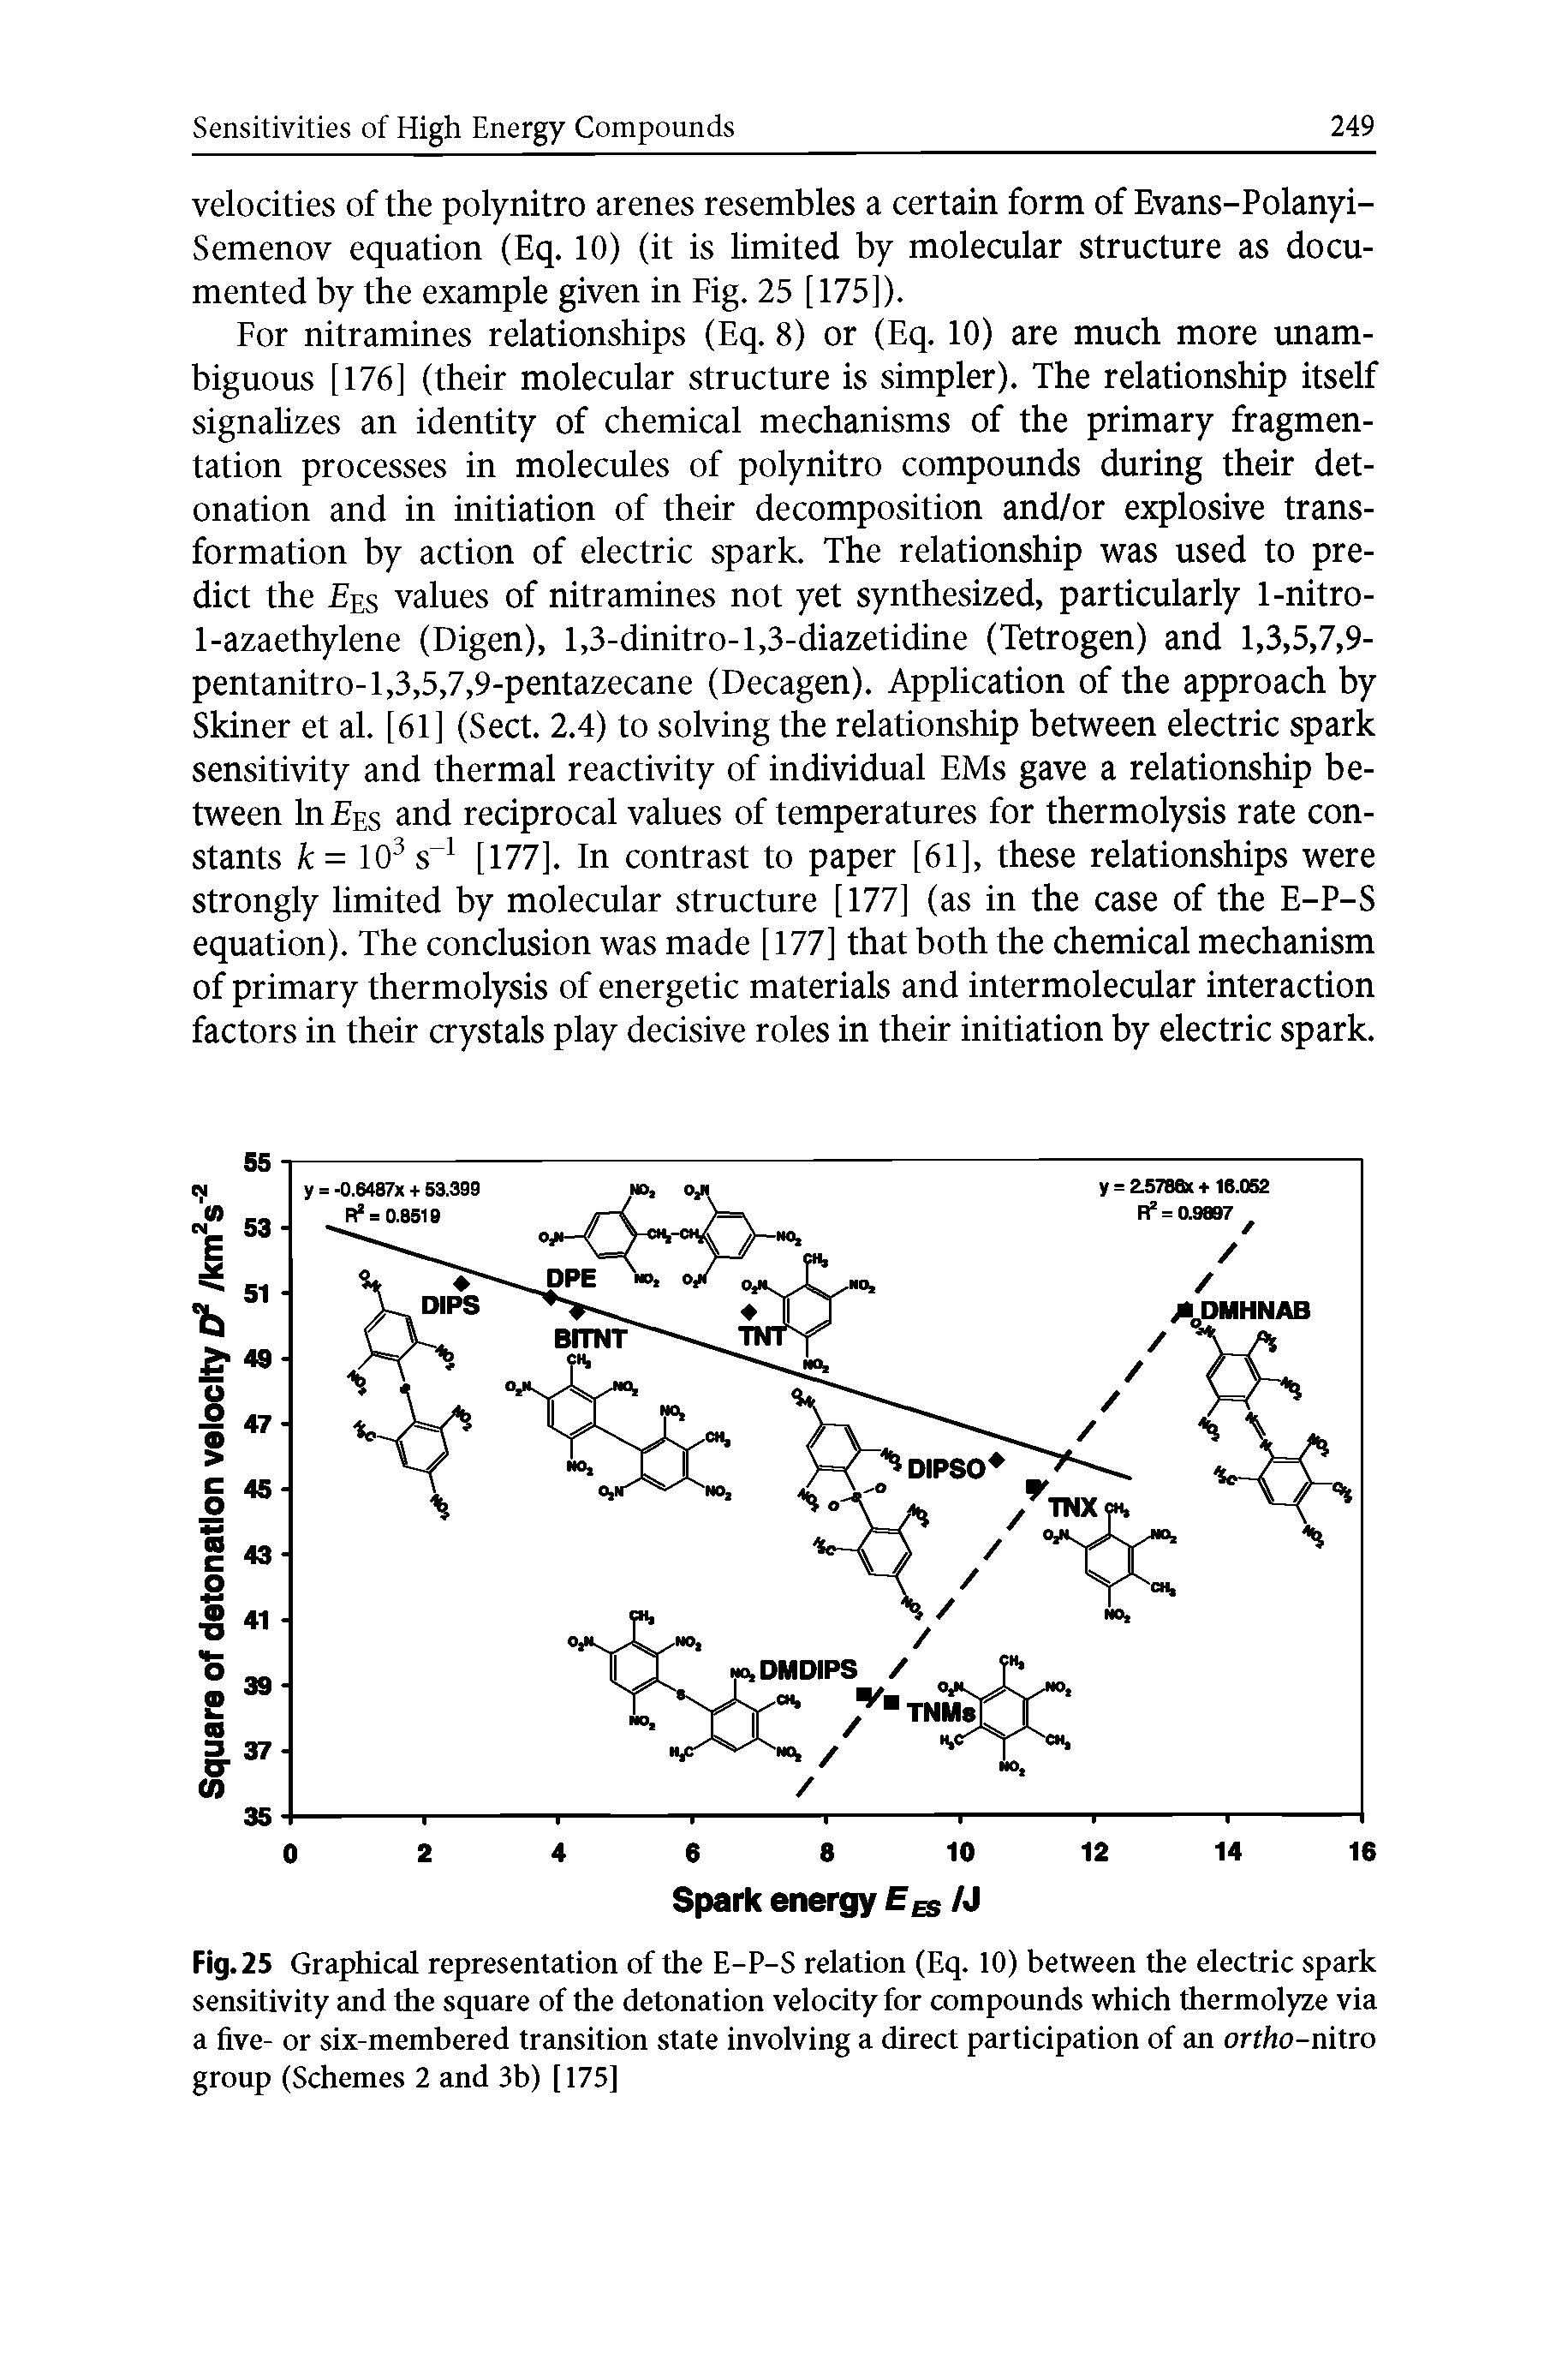 Fig. 25 Graphical representation of the E-P-S relation (Eq. 10) between the electric spark sensitivity and the square of the detonation velocity for compounds which thermolyze via a five- or six-membered transition state involving a direct participation of an orf/io-nitro group (Schemes 2 and 3b) [ 175]...